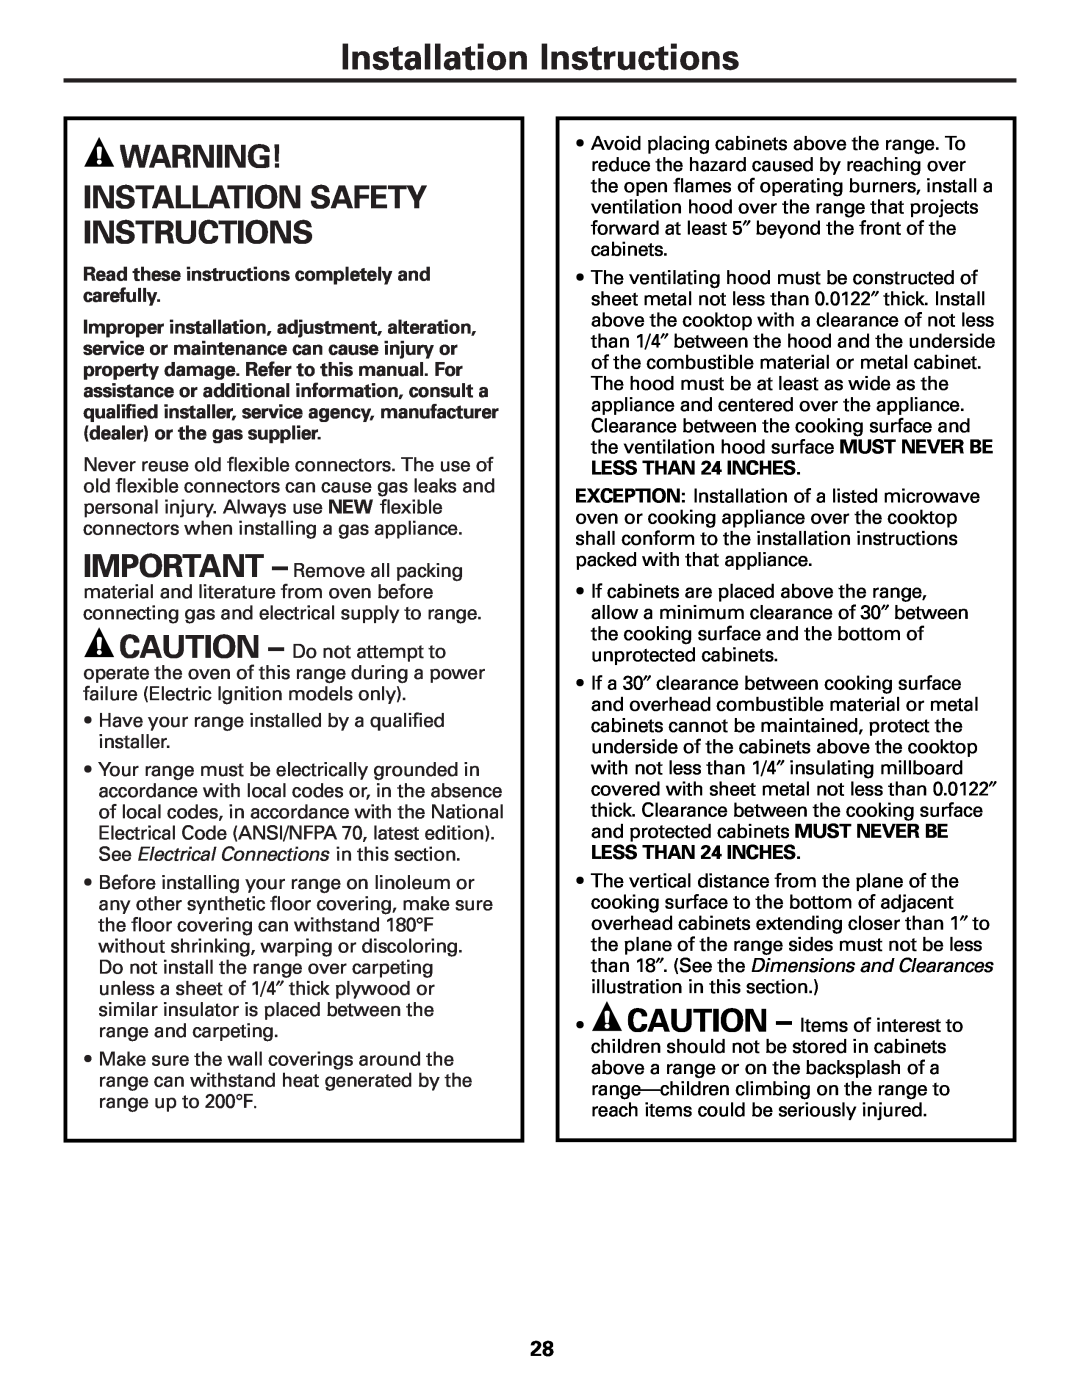 GE JGBS80 Installation Instructions, Warning! Installation Safety Instructions, LESS THAN 24 INCHES 